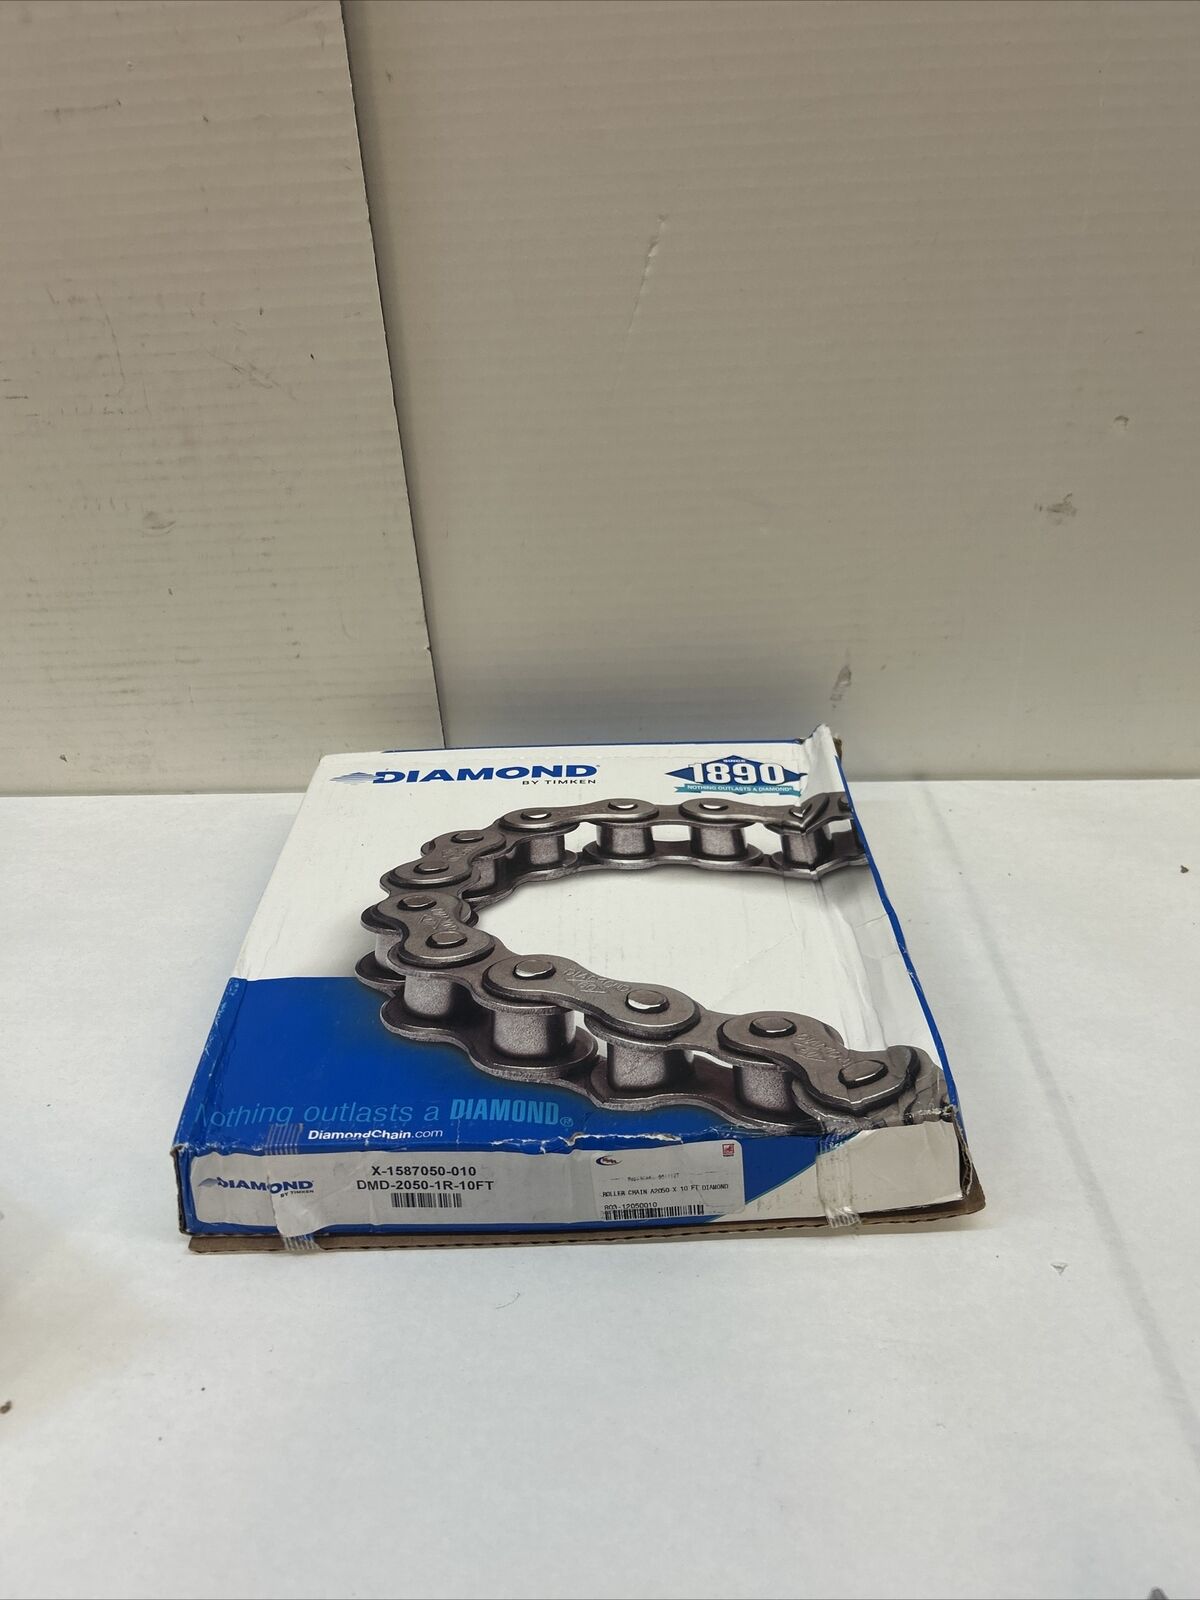 NEW SEALED DIAMOND X-1587050-010 CHAIN 10FT 2050 RIVETED